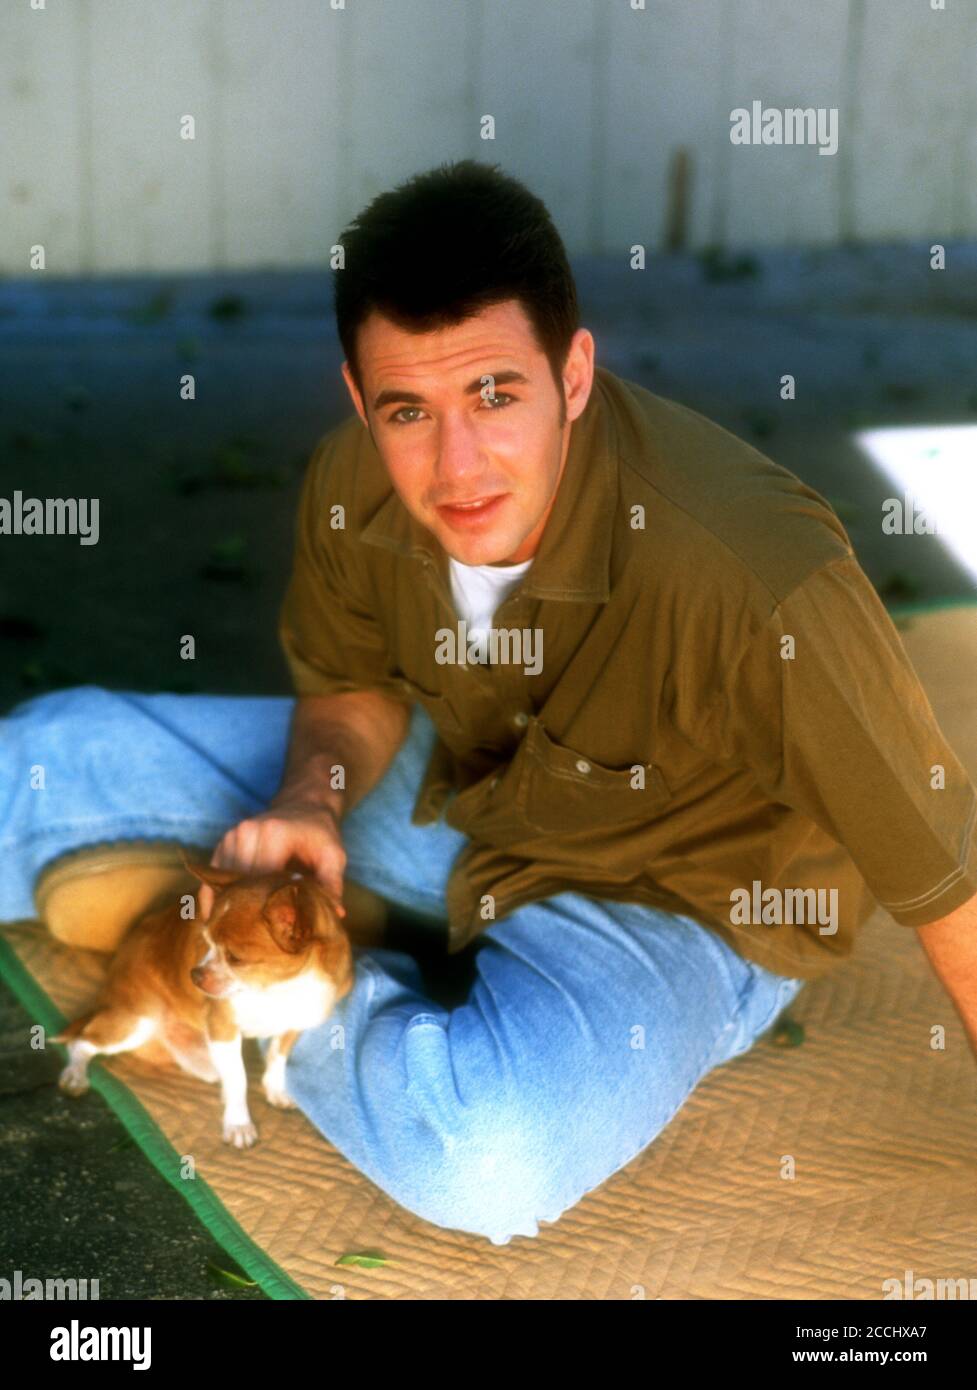 Los Angeles, California, USA 8th March 1996 (Exclusive) Actor Larry Sullivan poses at a photo shoot on March 8, 1996 in Los Angeles, California, USA. Photo by Barry King/Alamy Stock Photo Stock Photo